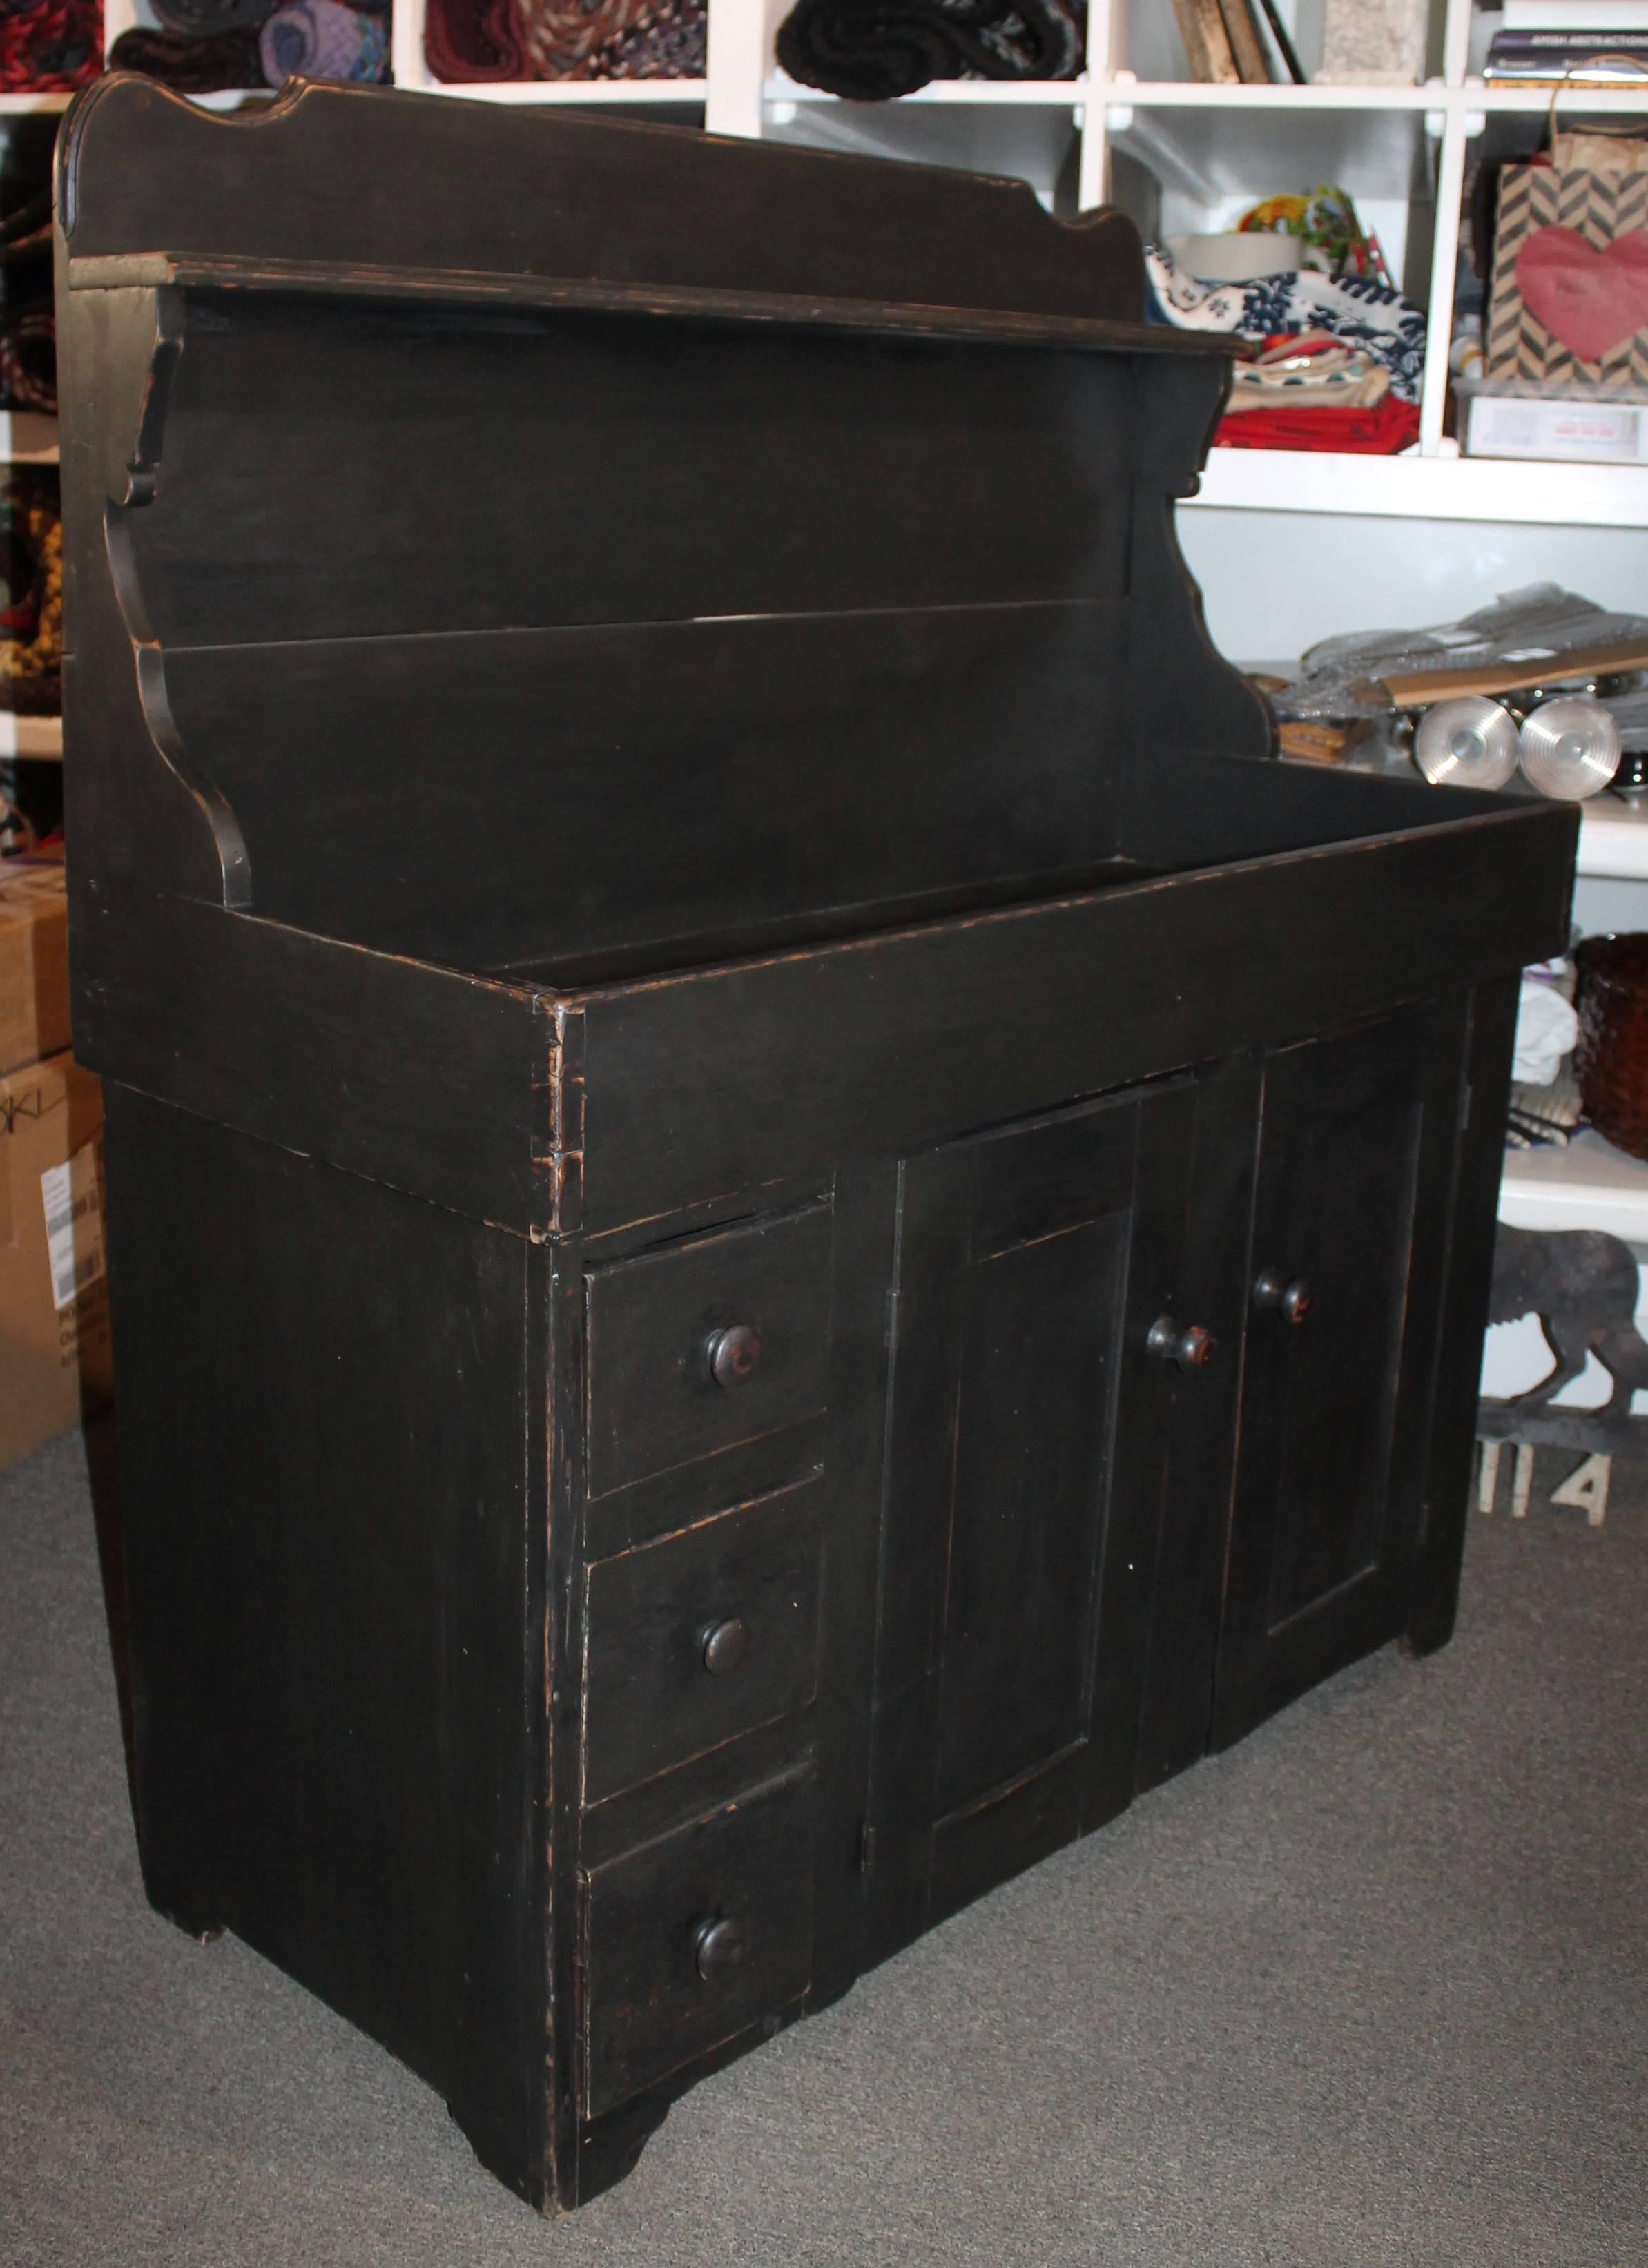 This fine form dovetailed case and drawers dry sink hutch is in wonderful as found condition. The black painted surface is secondary paint along with the cream painted interior is over paint. All hardware and door pulls are original to the piece.